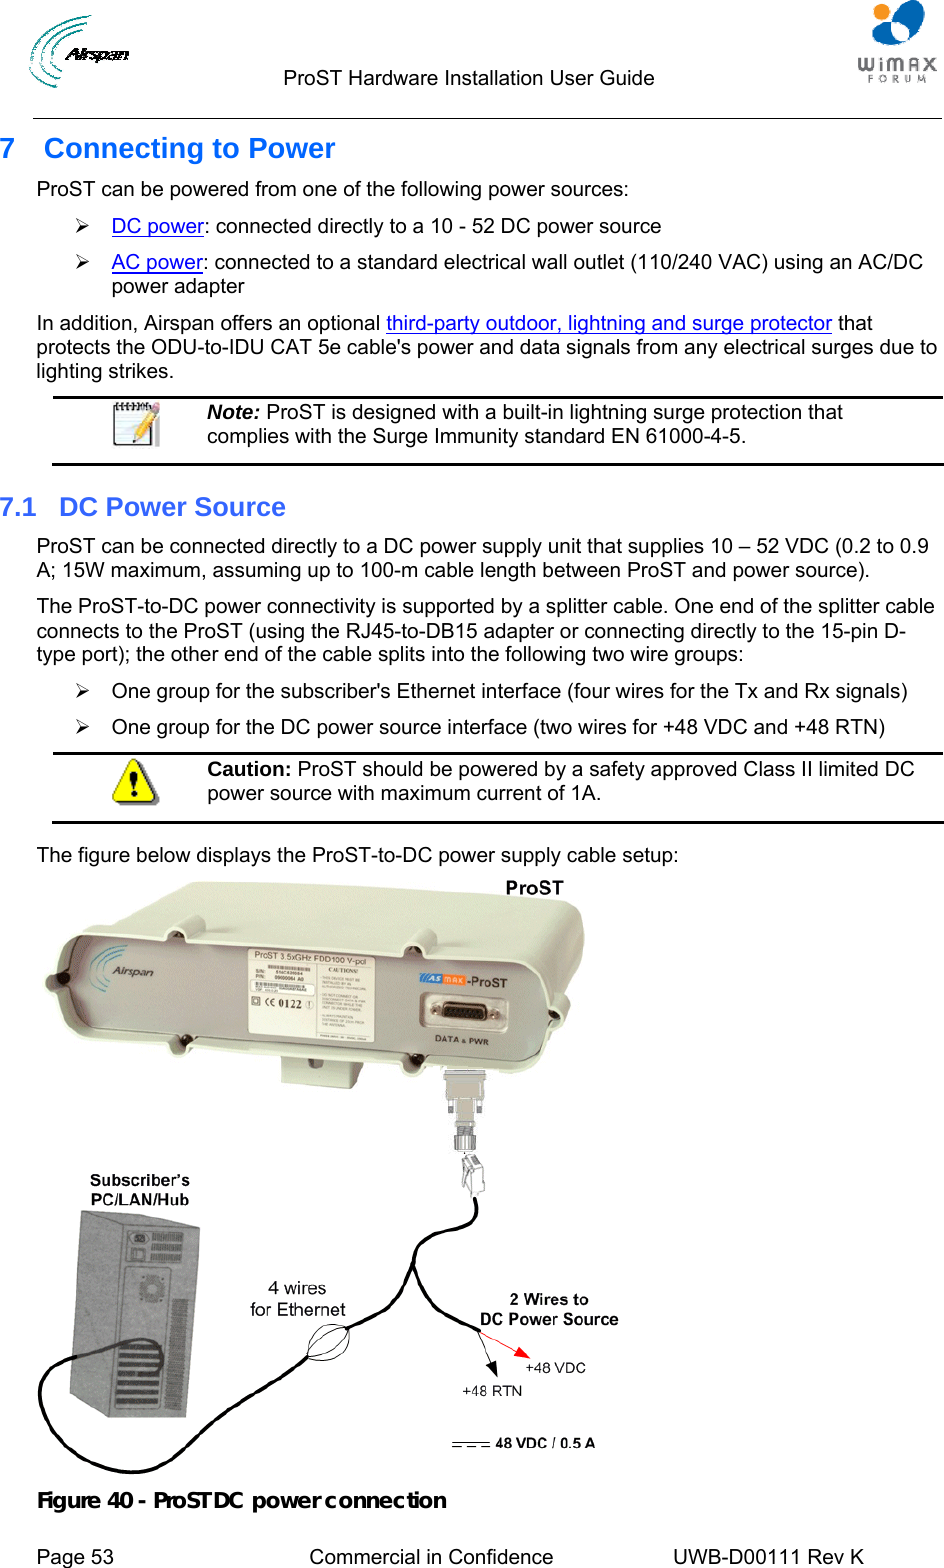                                  ProST Hardware Installation User Guide     Page 53  Commercial in Confidence  UWB-D00111 Rev K   7 Connecting to Power ProST can be powered from one of the following power sources: ¾ 2DC power: connected directly to a 10 - 52 DC power source ¾ 2AC power: connected to a standard electrical wall outlet (110/240 VAC) using an AC/DC power adapter In addition, Airspan offers an optional 2third-party outdoor, lightning and surge protector that protects the ODU-to-IDU CAT 5e cable&apos;s power and data signals from any electrical surges due to lighting strikes.  Note: ProST is designed with a built-in lightning surge protection that complies with the Surge Immunity standard EN 61000-4-5. 7.1  DC Power Source ProST can be connected directly to a DC power supply unit that supplies 10 – 52 VDC (0.2 to 0.9 A; 15W maximum, assuming up to 100-m cable length between ProST and power source).  The ProST-to-DC power connectivity is supported by a splitter cable. One end of the splitter cable connects to the ProST (using the RJ45-to-DB15 adapter or connecting directly to the 15-pin D-type port); the other end of the cable splits into the following two wire groups:  ¾  One group for the subscriber&apos;s Ethernet interface (four wires for the Tx and Rx signals) ¾  One group for the DC power source interface (two wires for +48 VDC and +48 RTN)  Caution: ProST should be powered by a safety approved Class II limited DC power source with maximum current of 1A.  The figure below displays the ProST-to-DC power supply cable setup:  Figure 40 - ProST DC power connection 